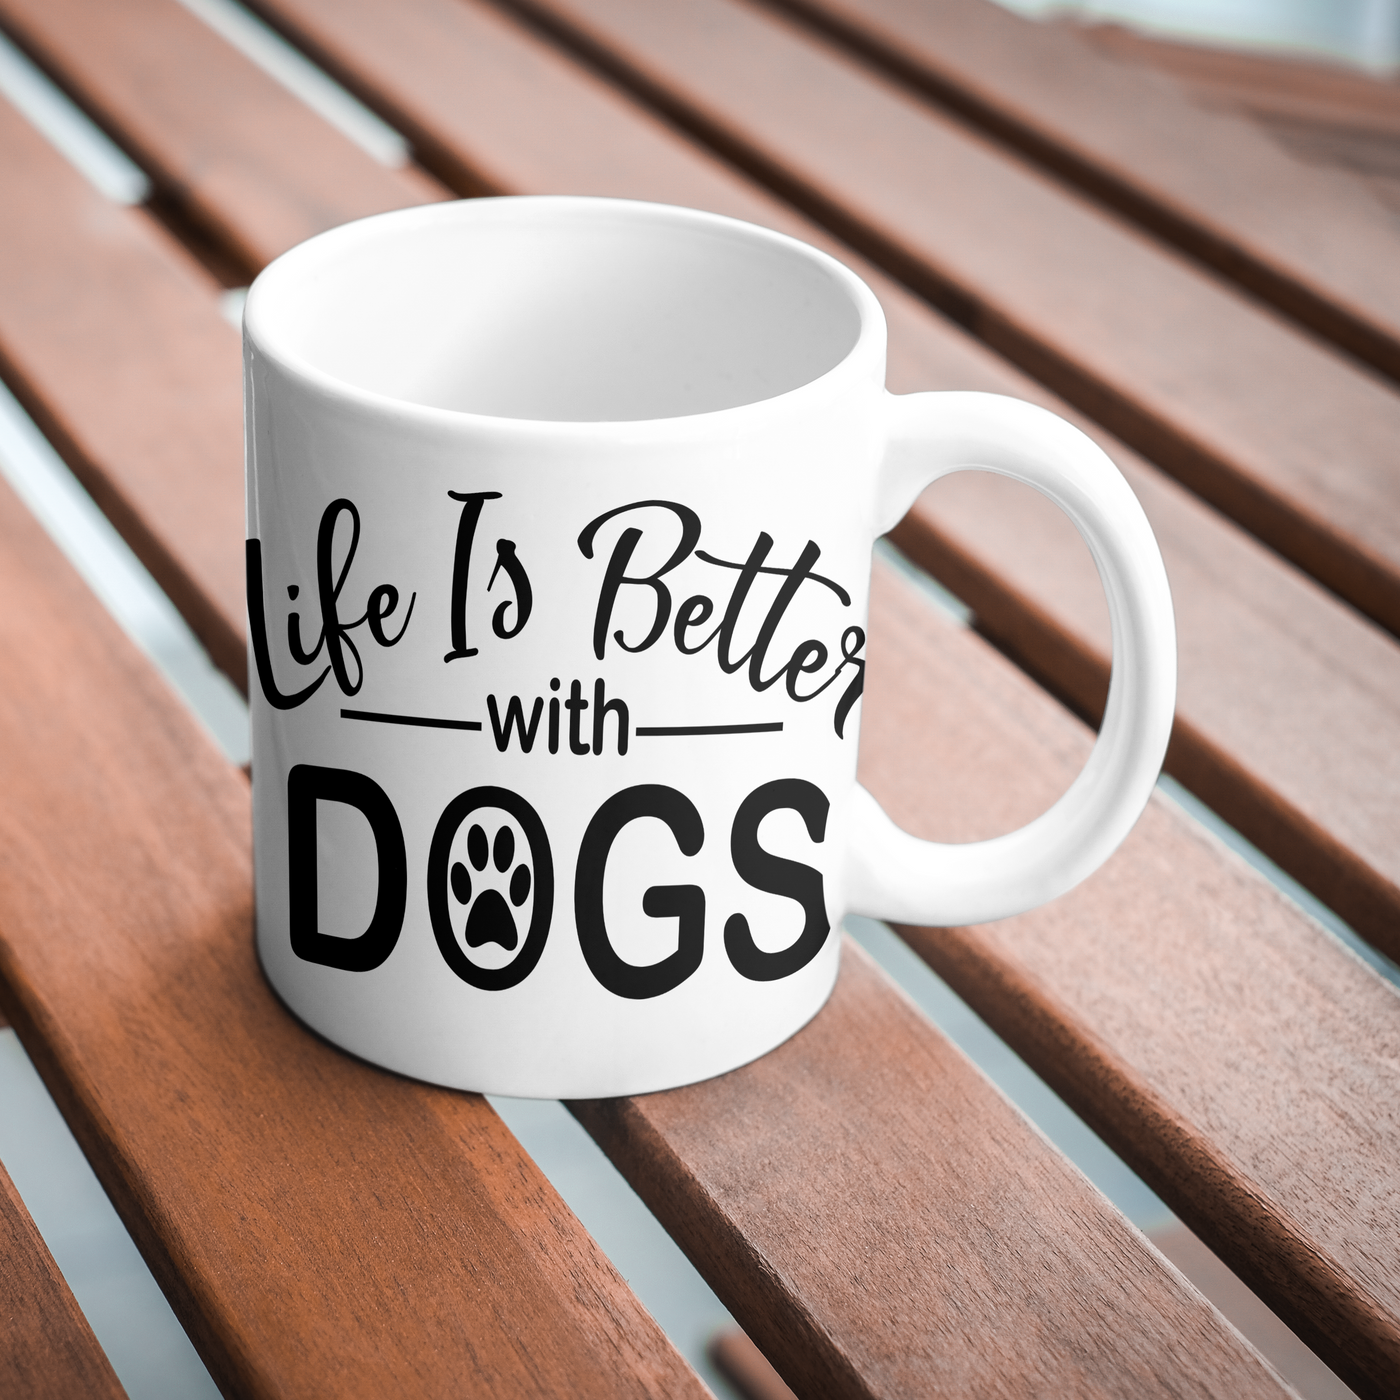 Life Is Better With Dogs Mug